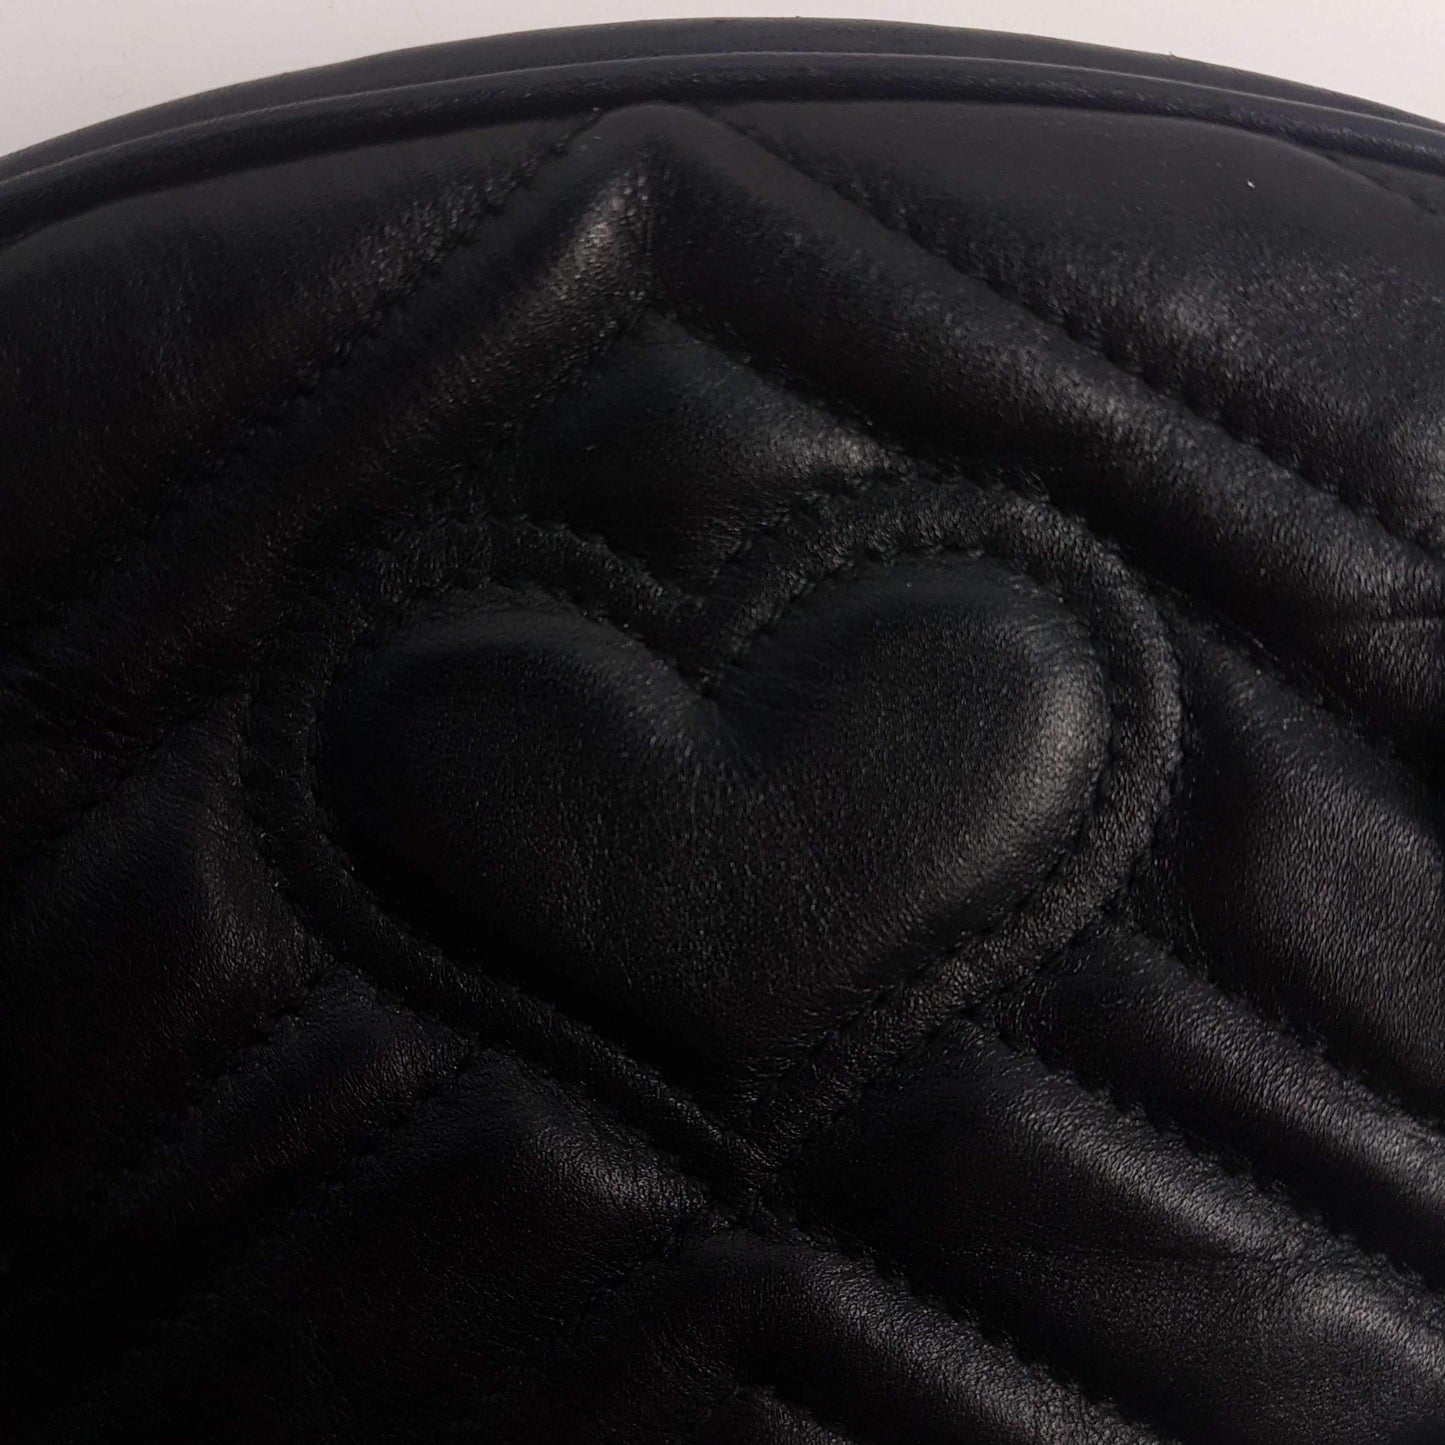 Load image into Gallery viewer, Gucci Gucci Black Quilted Leather GG Marmont Waist Belt Bag LVBagaholic
